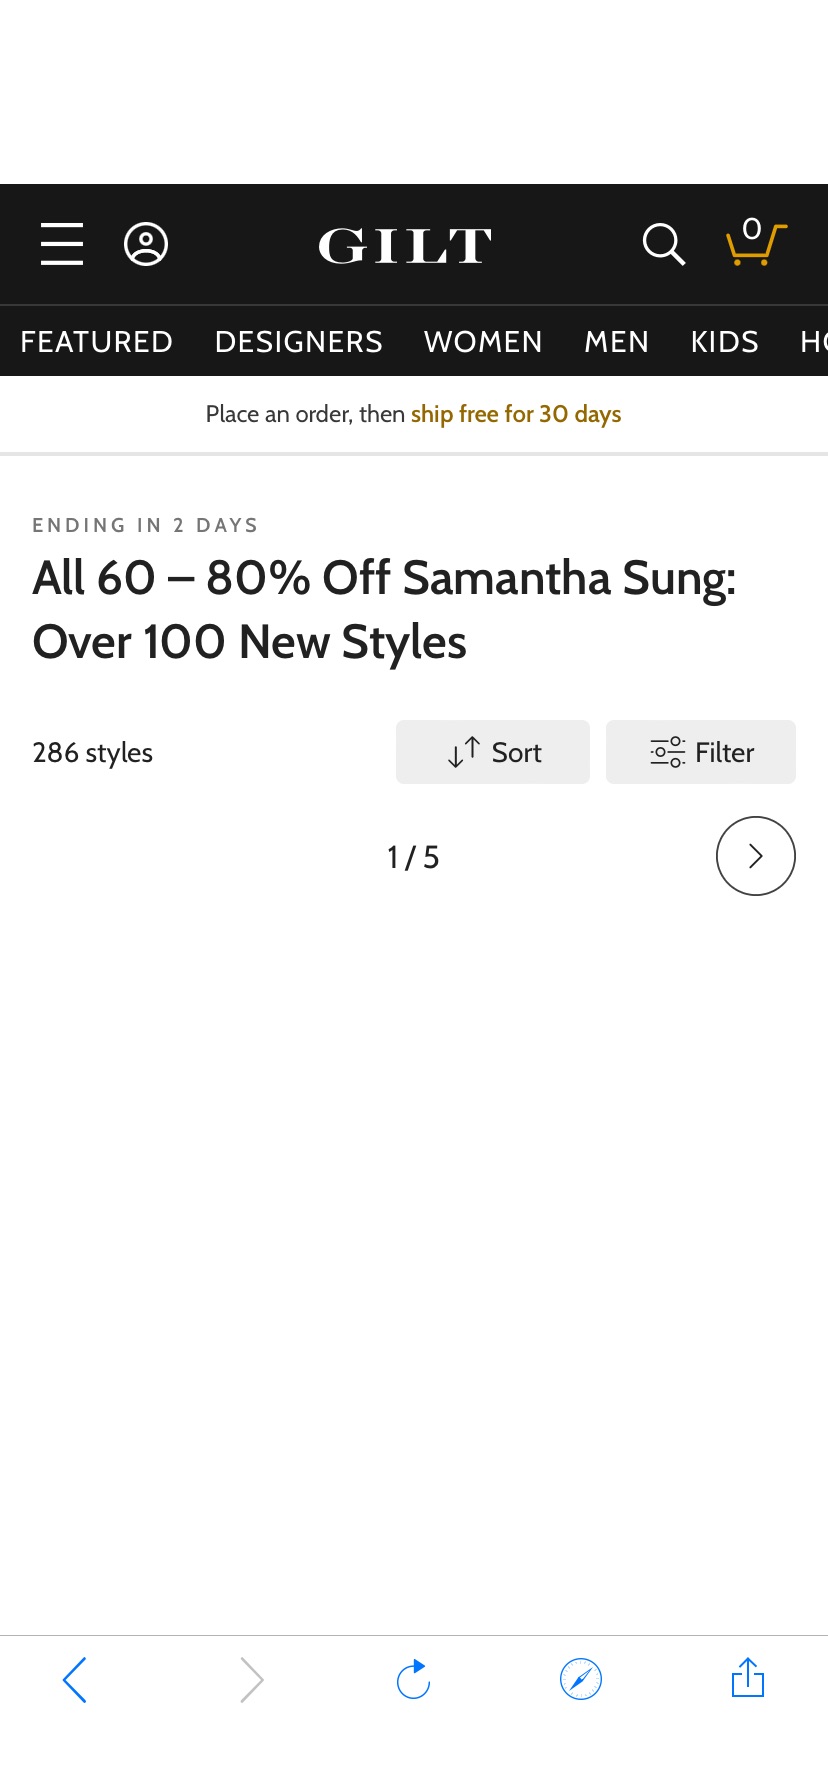 All 60 – 80% Off Samantha Sung: Over 100 New Styles / Gilt